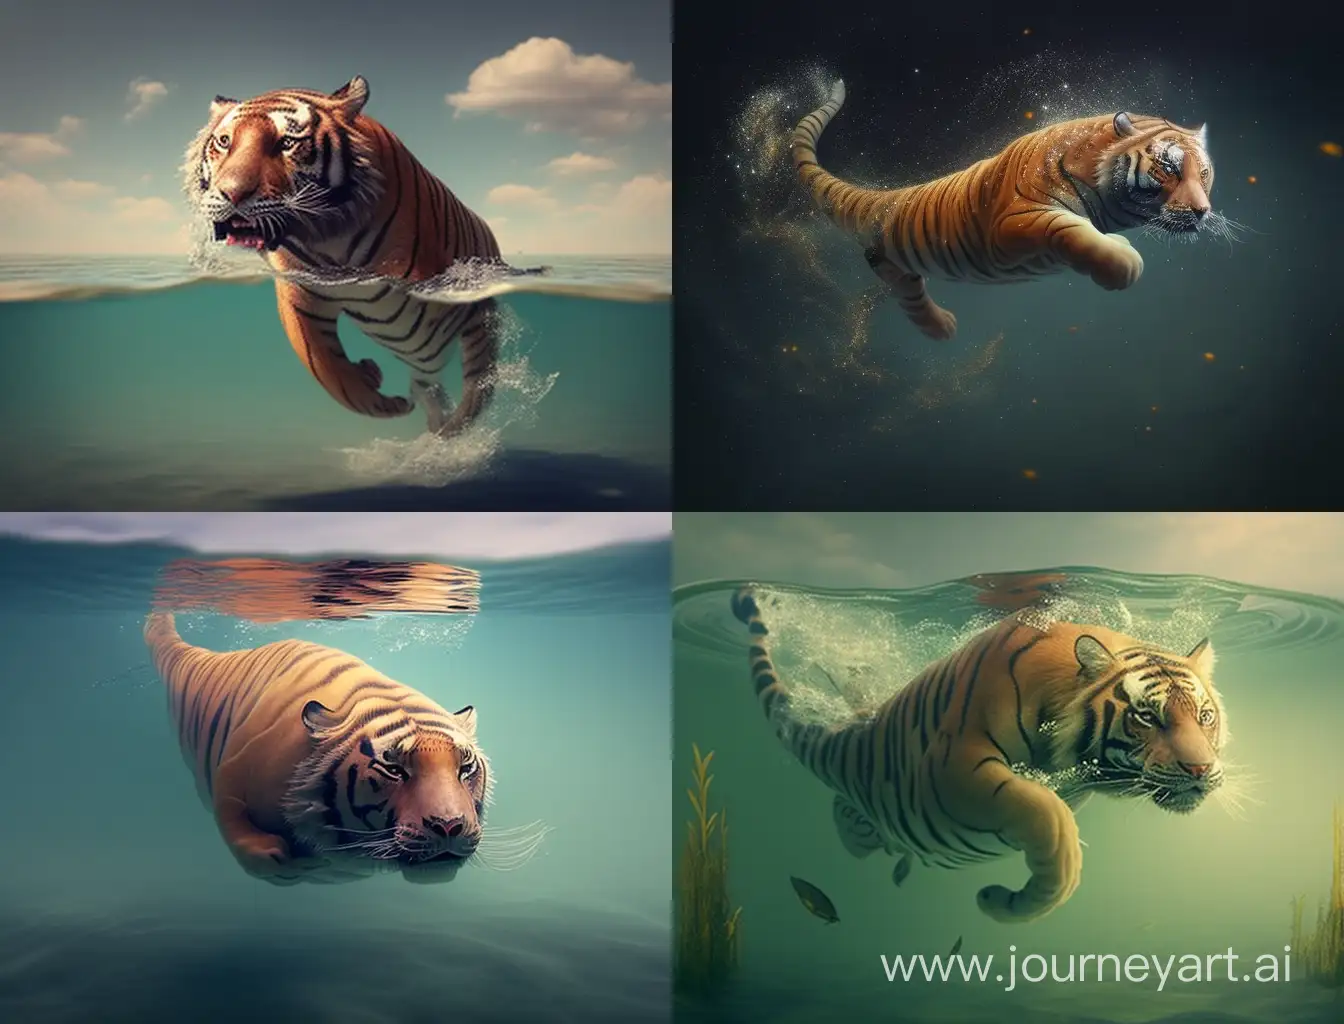 Graceful-Floating-Tiger-in-a-Vibrant-43-Aspect-Ratio